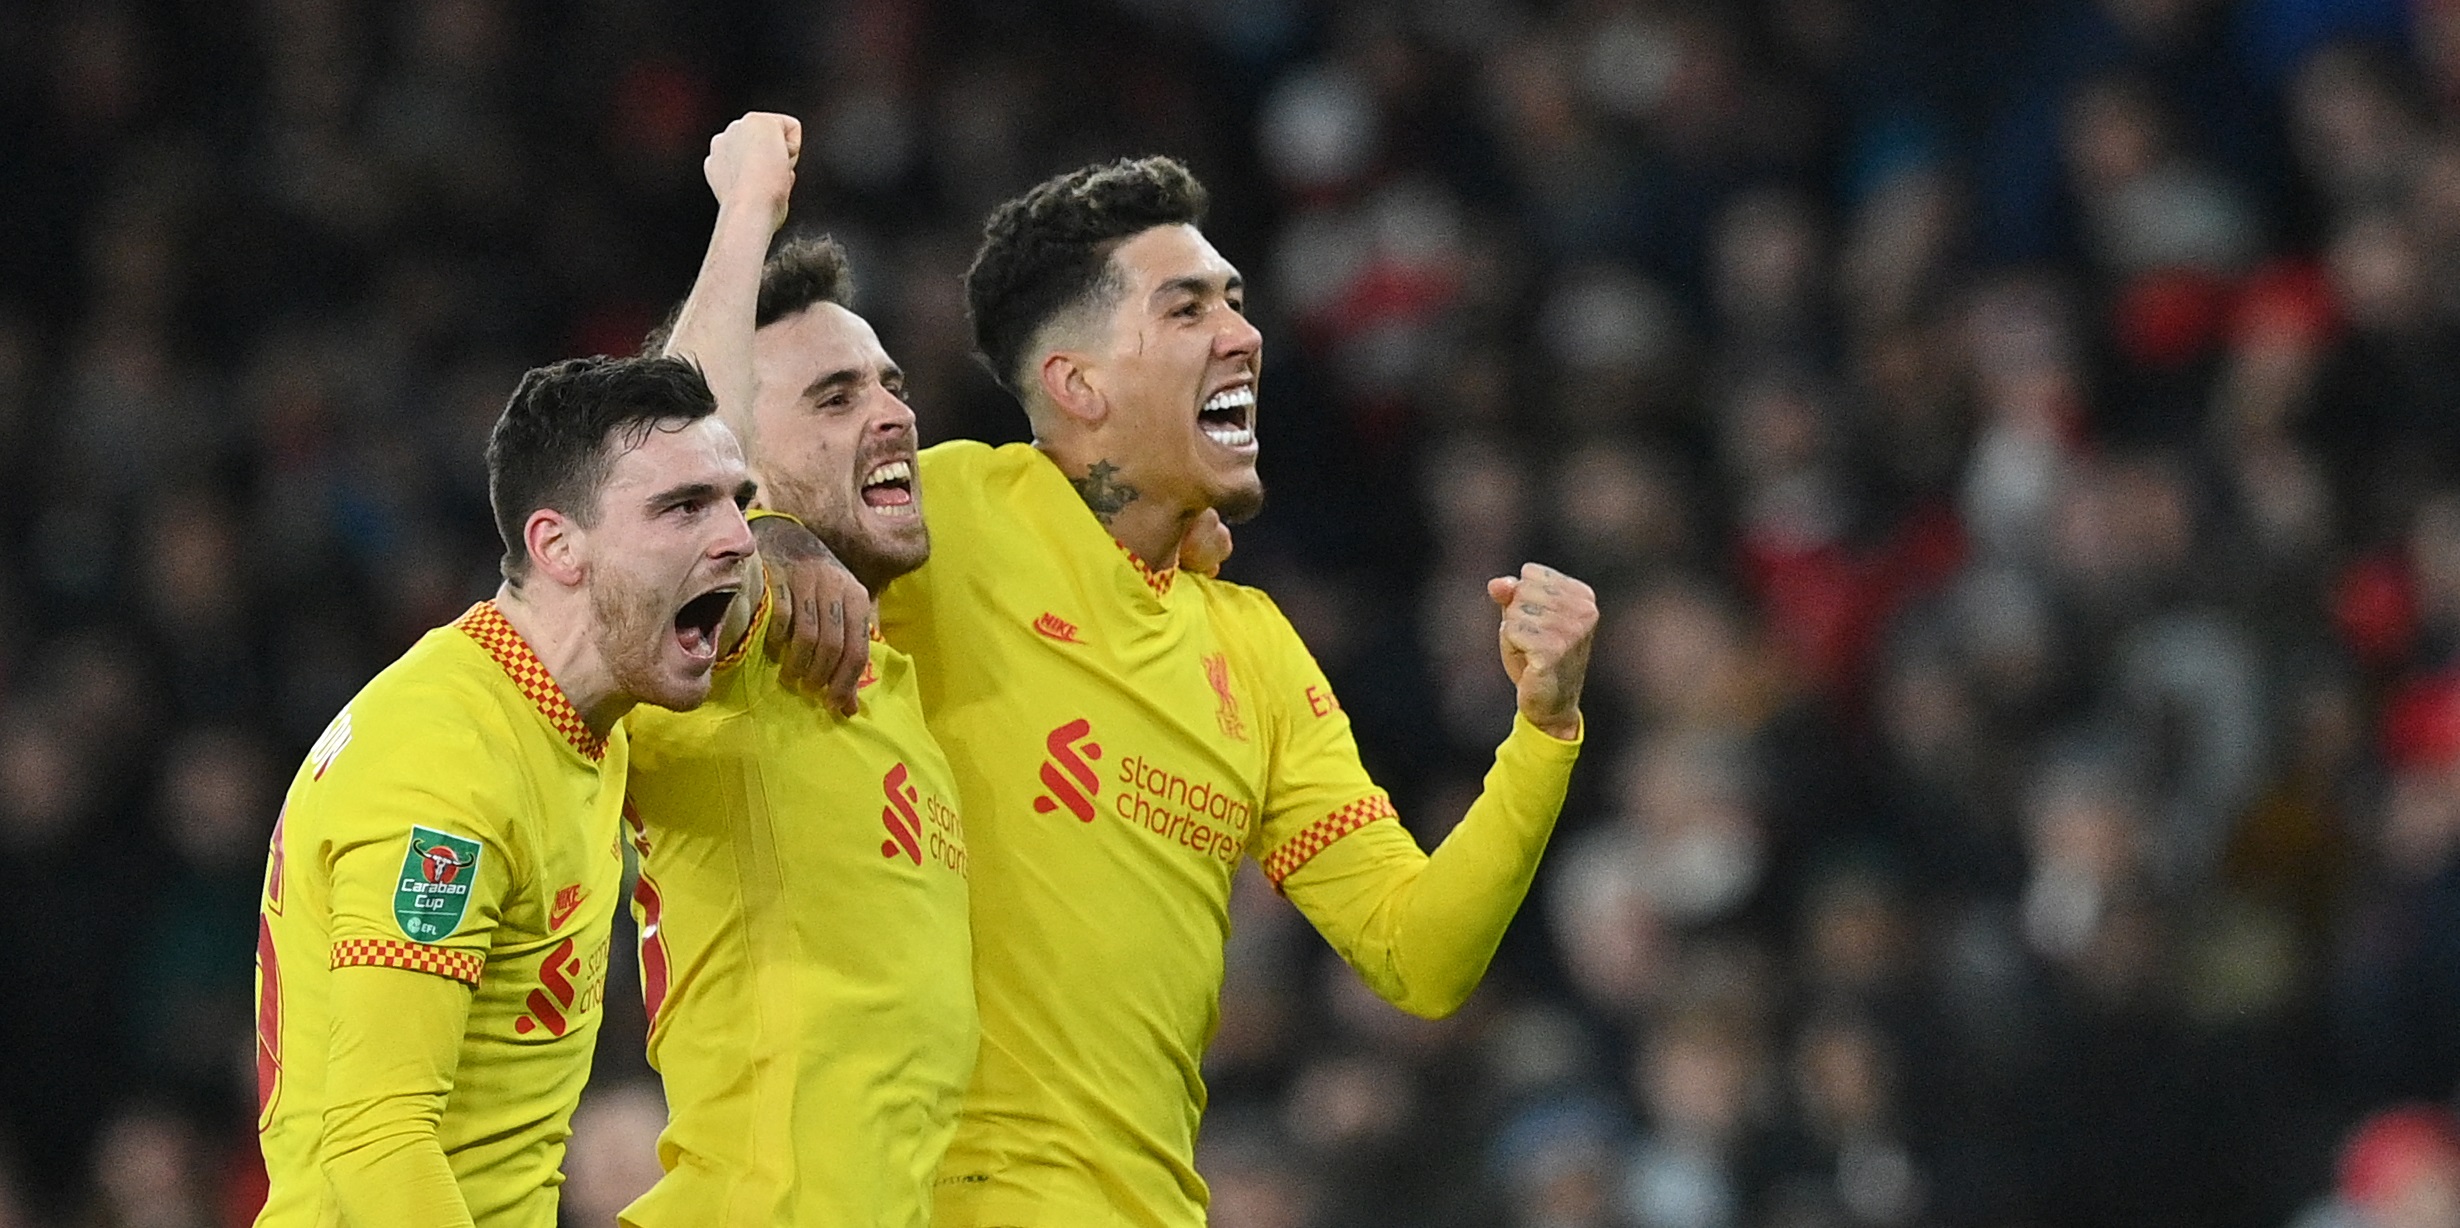 ‘No chance’ – Liverpool to be without 25-goal duo for upcoming Leeds clash, Klopp confirms